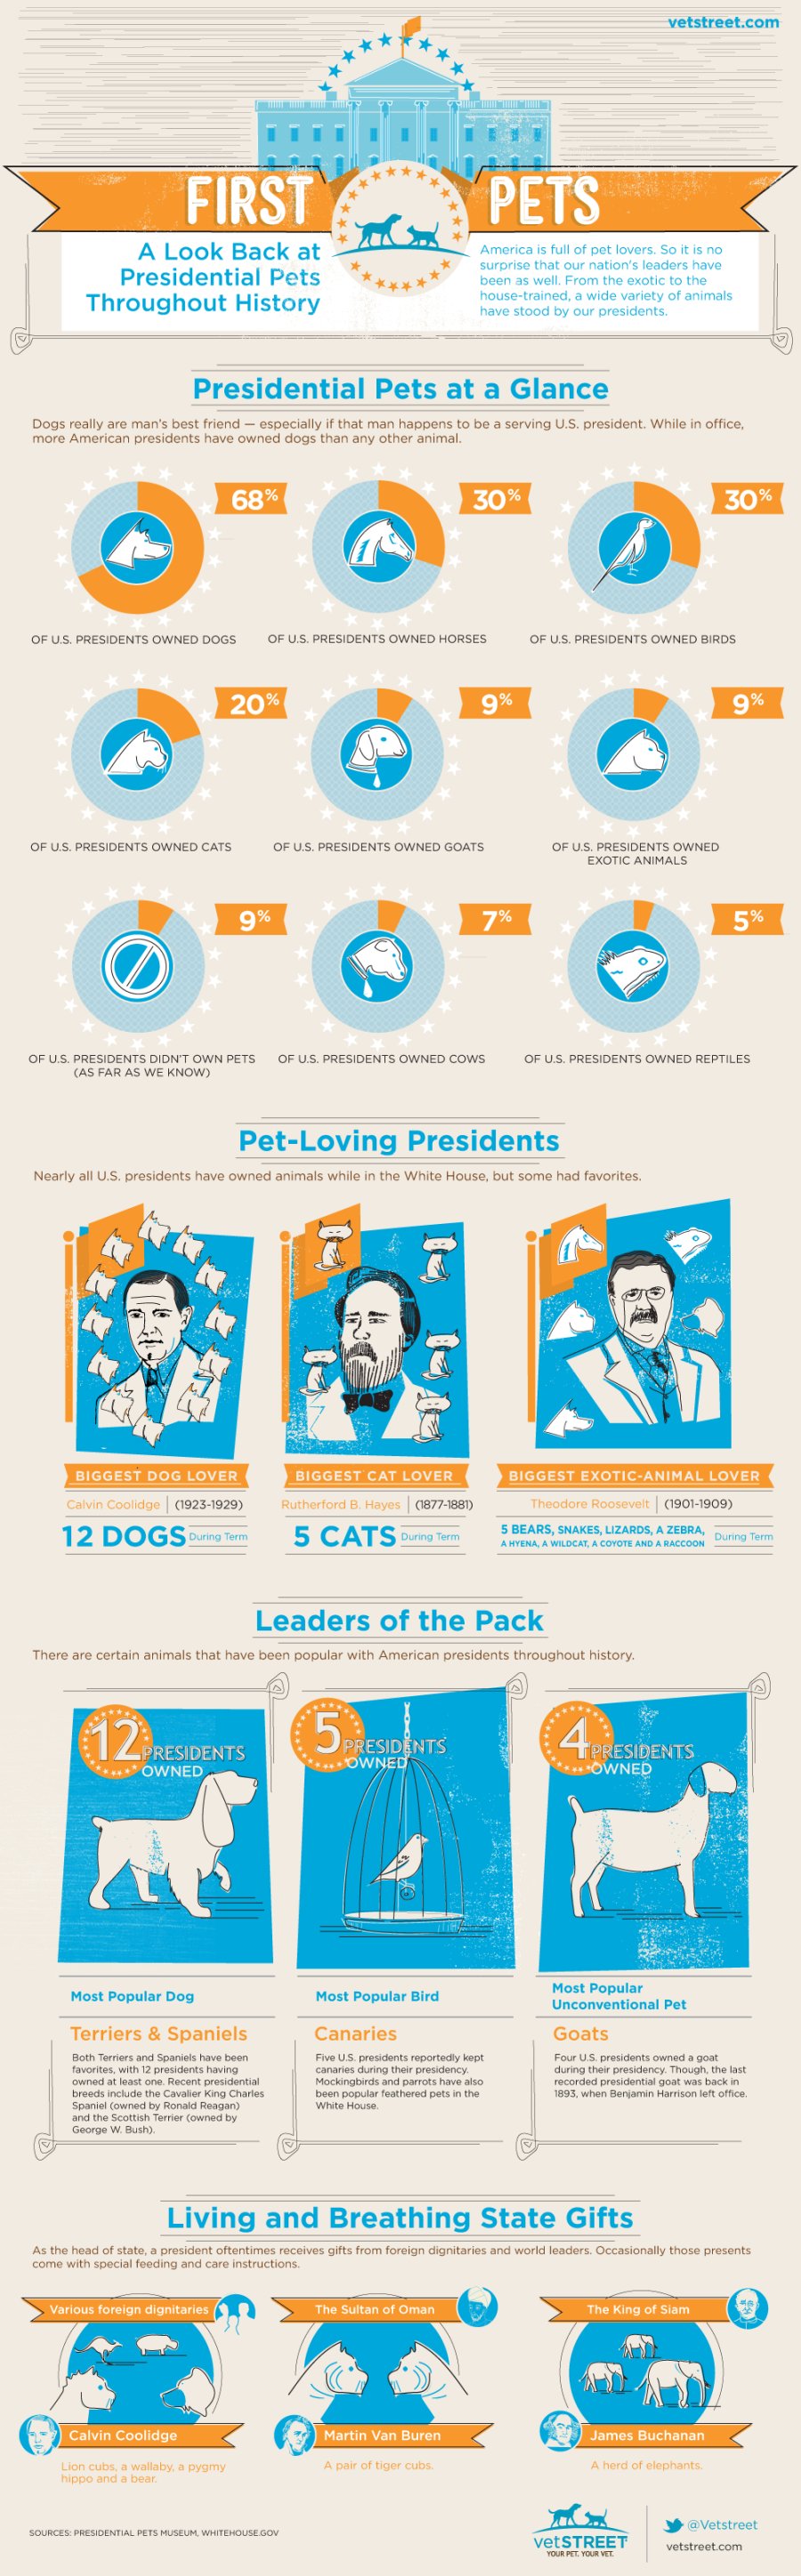 presidential pets